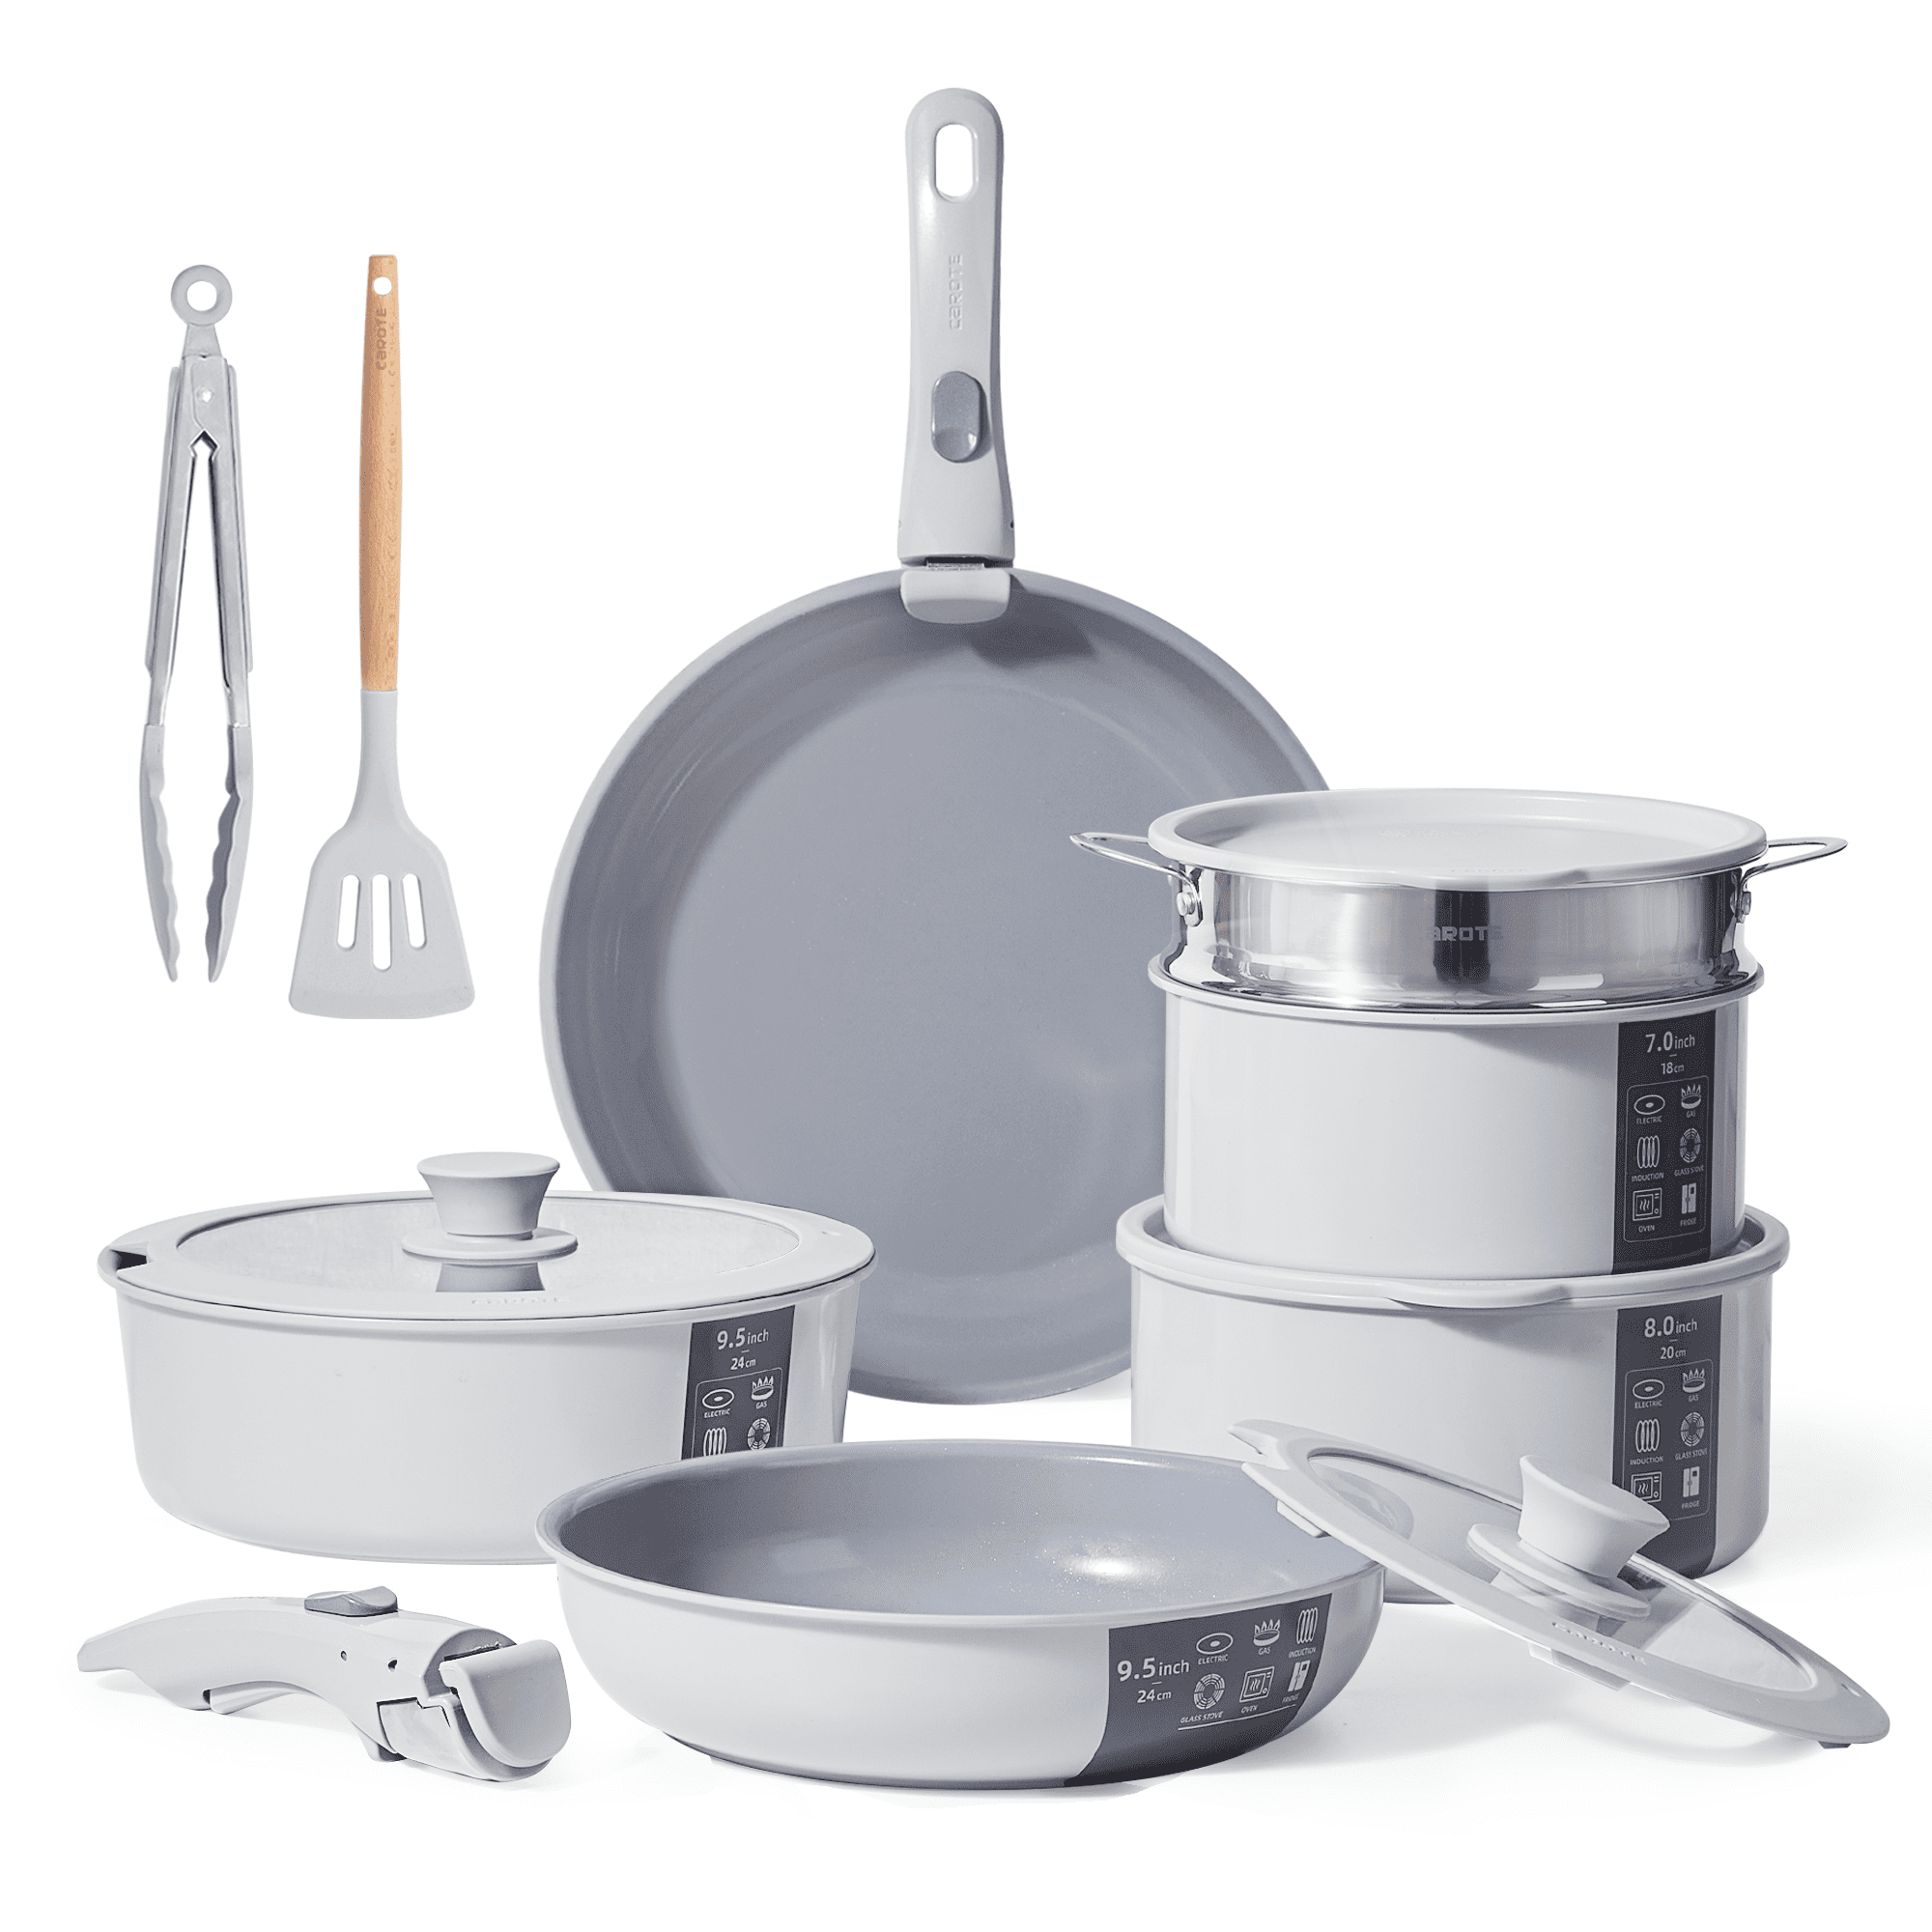 LOCHAS 13 Piece Pots And Pans Set - Safe Nonstick Kitchen Cookware With  Removable Handle, RV Cookware Set, Oven Safe (Cream)